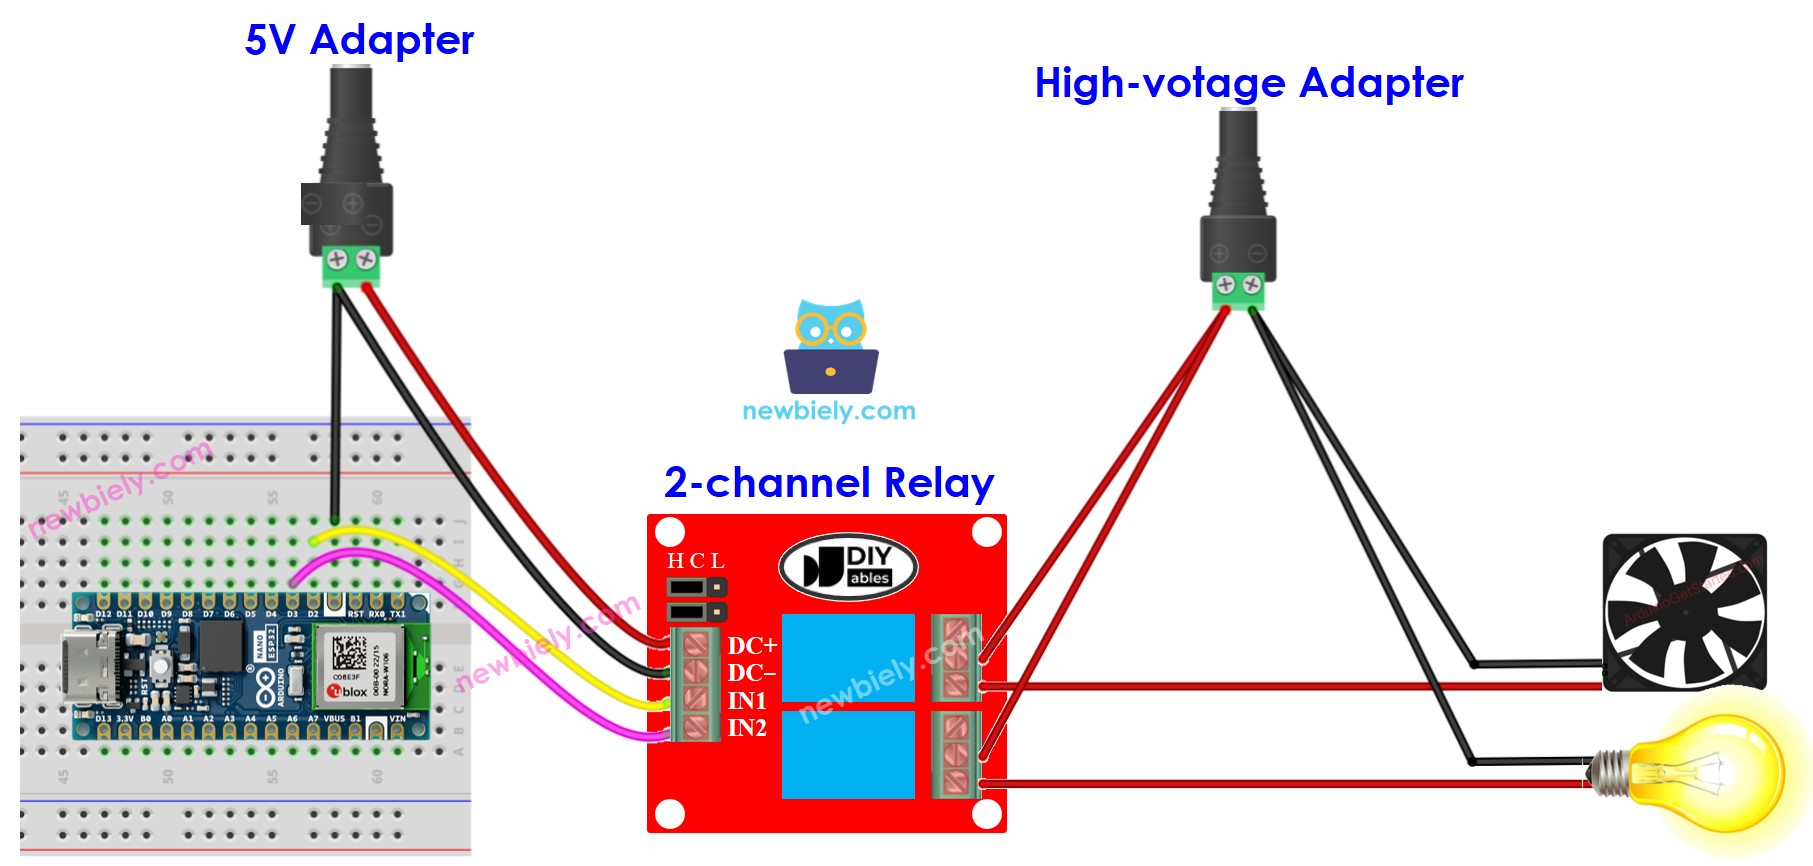 The wiring diagram between Arduino Nano ESP32 and 2-channel relay module